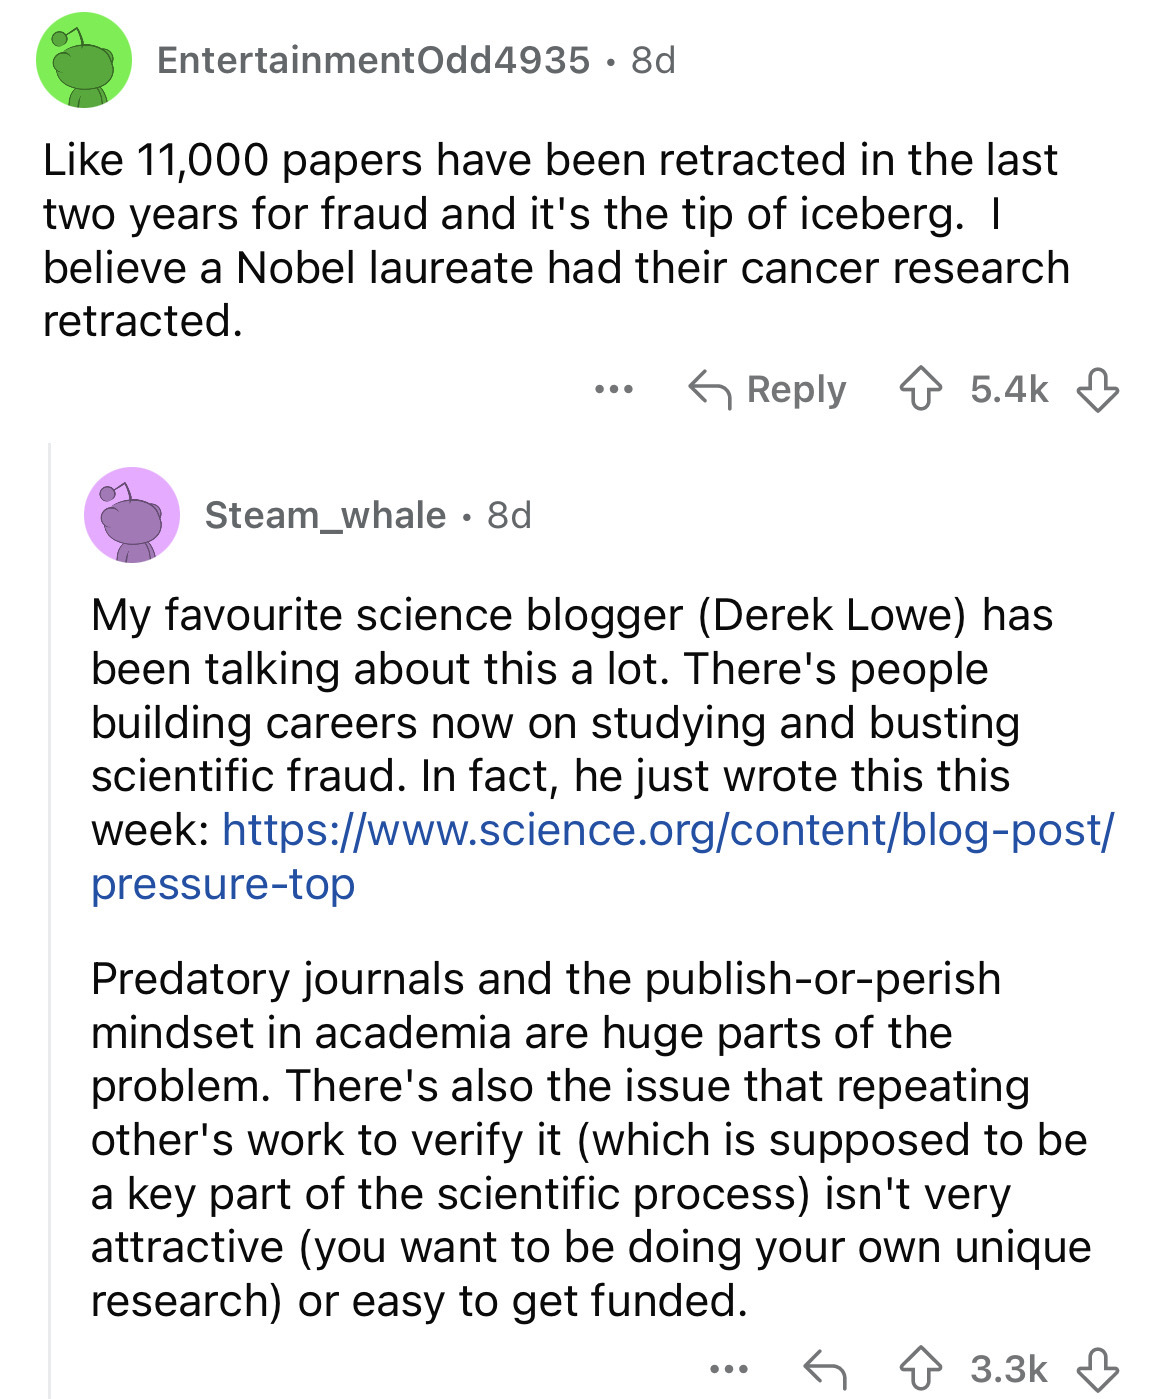 document - Entertainment Odd4935.8d 11,000 papers have been retracted in the last two years for fraud and it's the tip of iceberg. I believe a Nobel laureate had their cancer research retracted. ... Steam_whale 8d My favourite science blogger Derek Lowe h